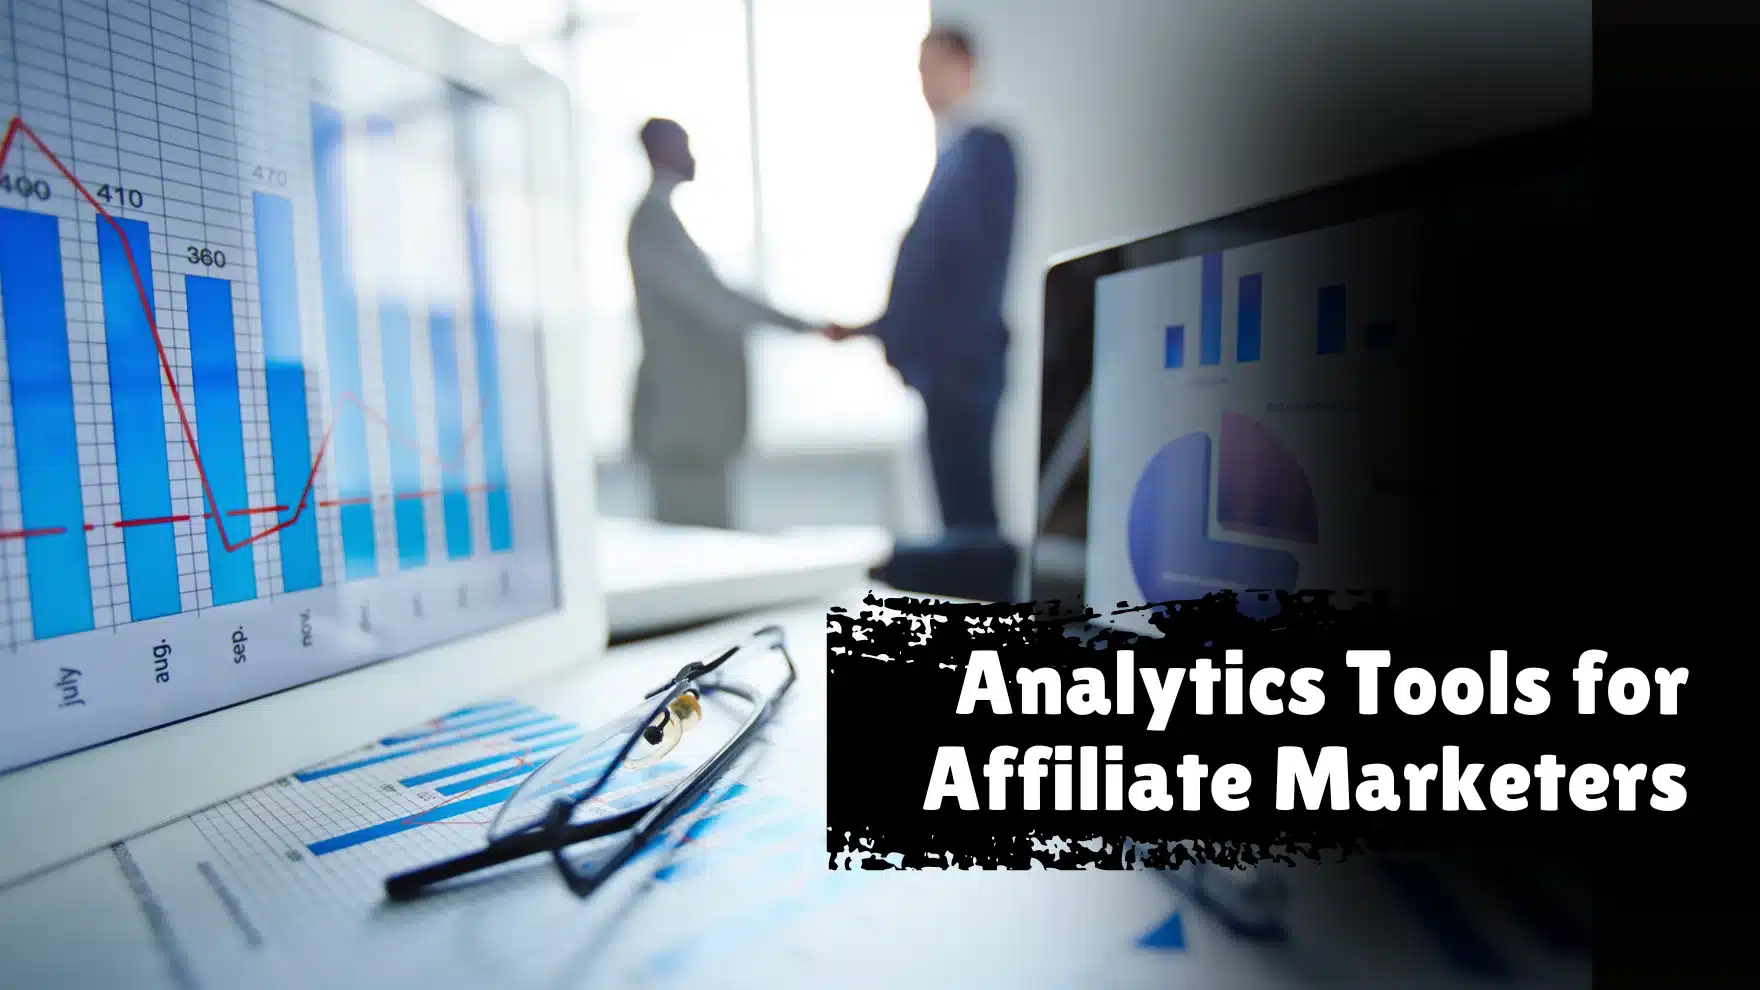 Analytics Tools for Affiliate Marketers